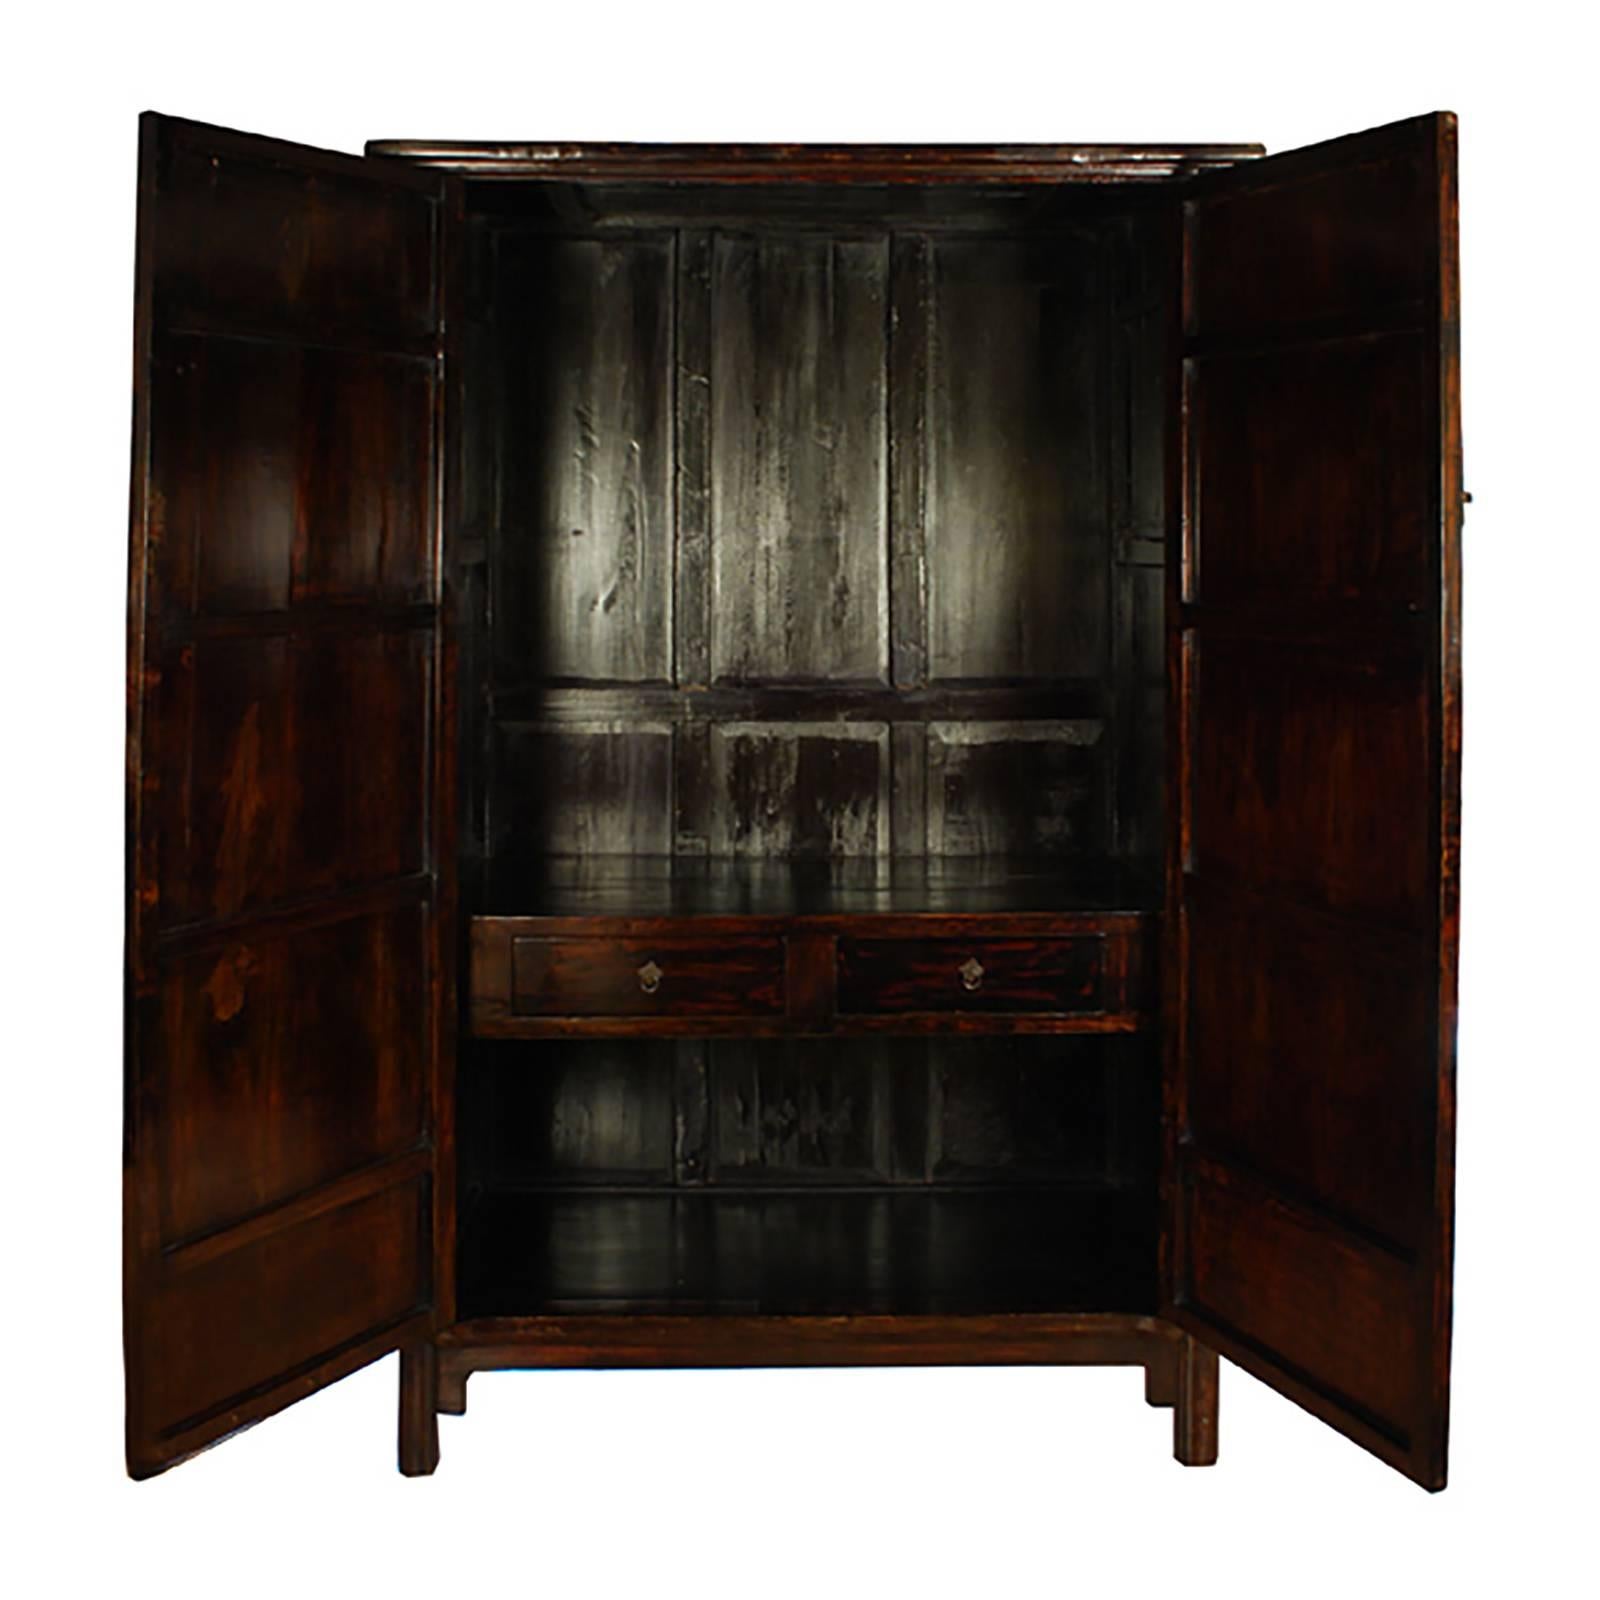 This cabinet gets its descriptive name from its rounded moldings, which resemble Chinese noodles. 150 years-old, it is dramatic in its simplicity, with clean lines that sweep upward and impressive door panels that extend without interruption from